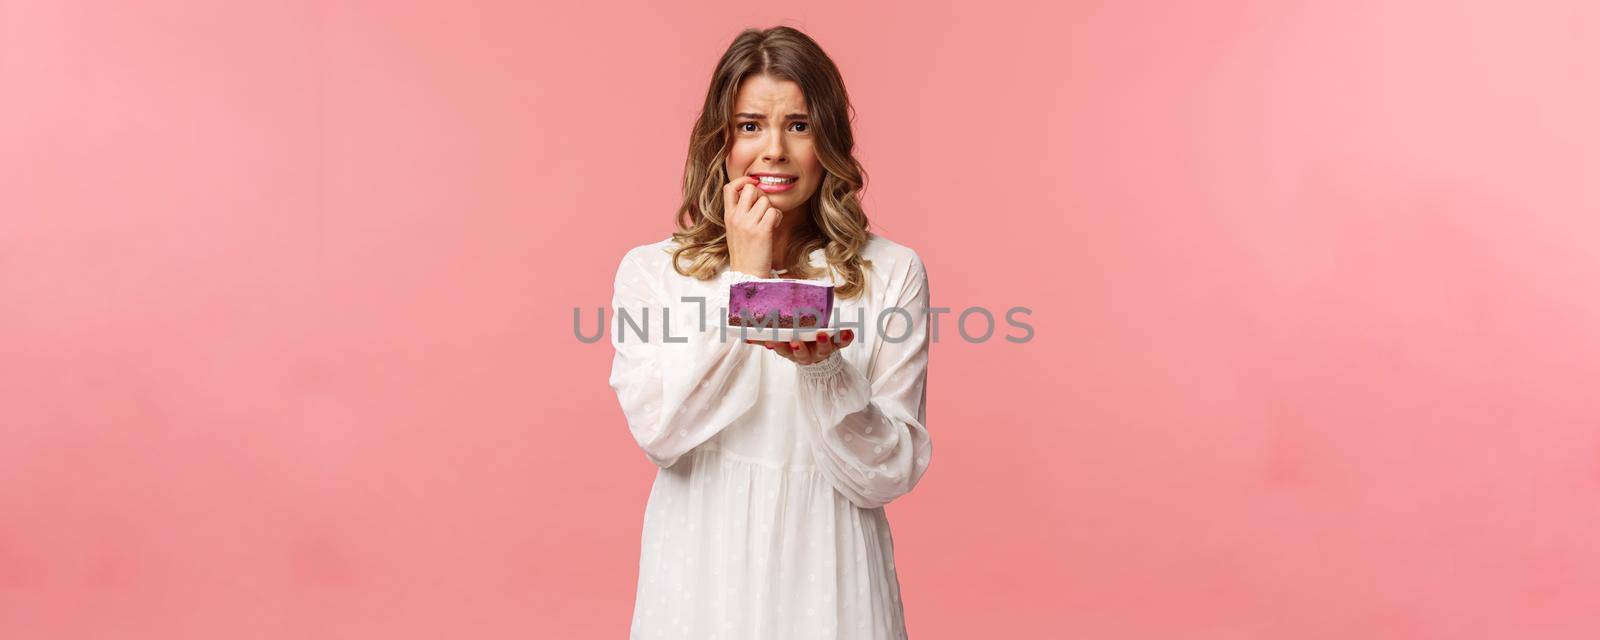 Holidays, spring and party concept. Alarmed, worried young blond girl hesitating eat cake or not, being on diet, trying stay healthy, holding dessert, biting finger nervously, pink background by Benzoix